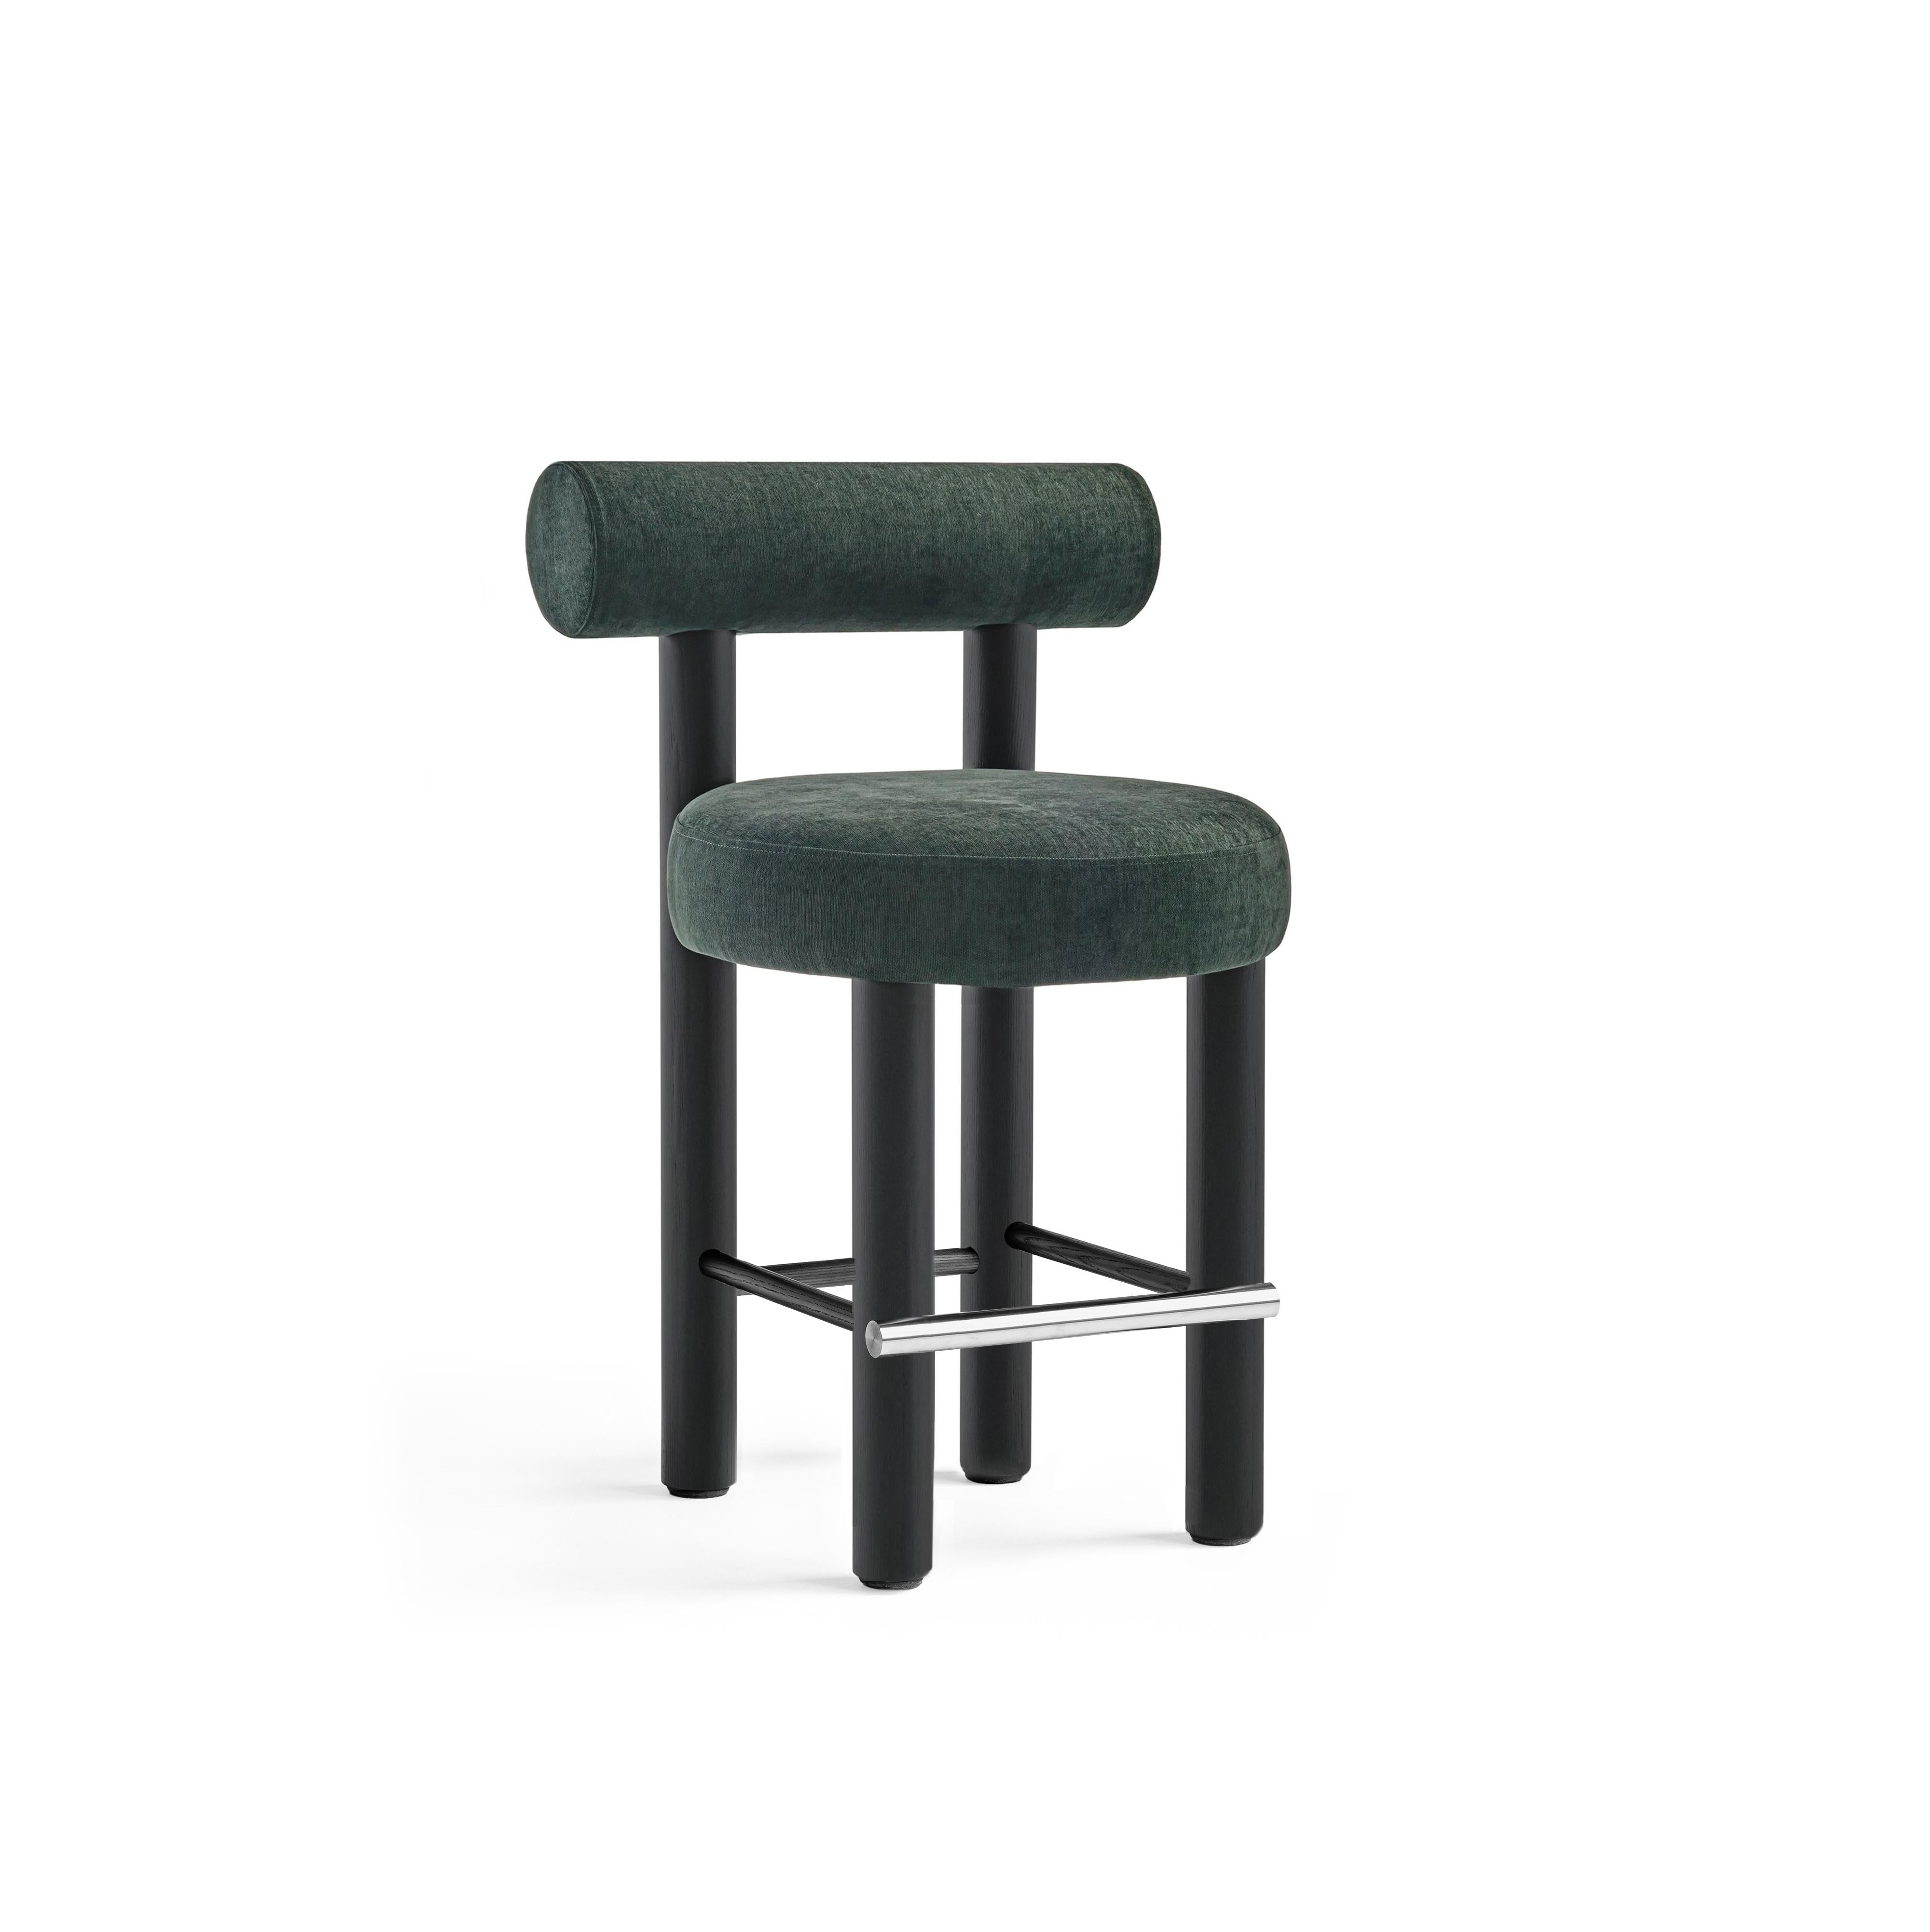 Chair Gropius CS2
Designer: Kateryna Sokolova

Dining chairs (x6): H74x57x57cm, seat H.47cm
Counter chairs x2): H88x57x57cm, seat H.65cm

Finishes: 
Legs: black wood
Upholstery: Green Velvet, Ranger 68

--
New NOOM furniture collection is dedicated